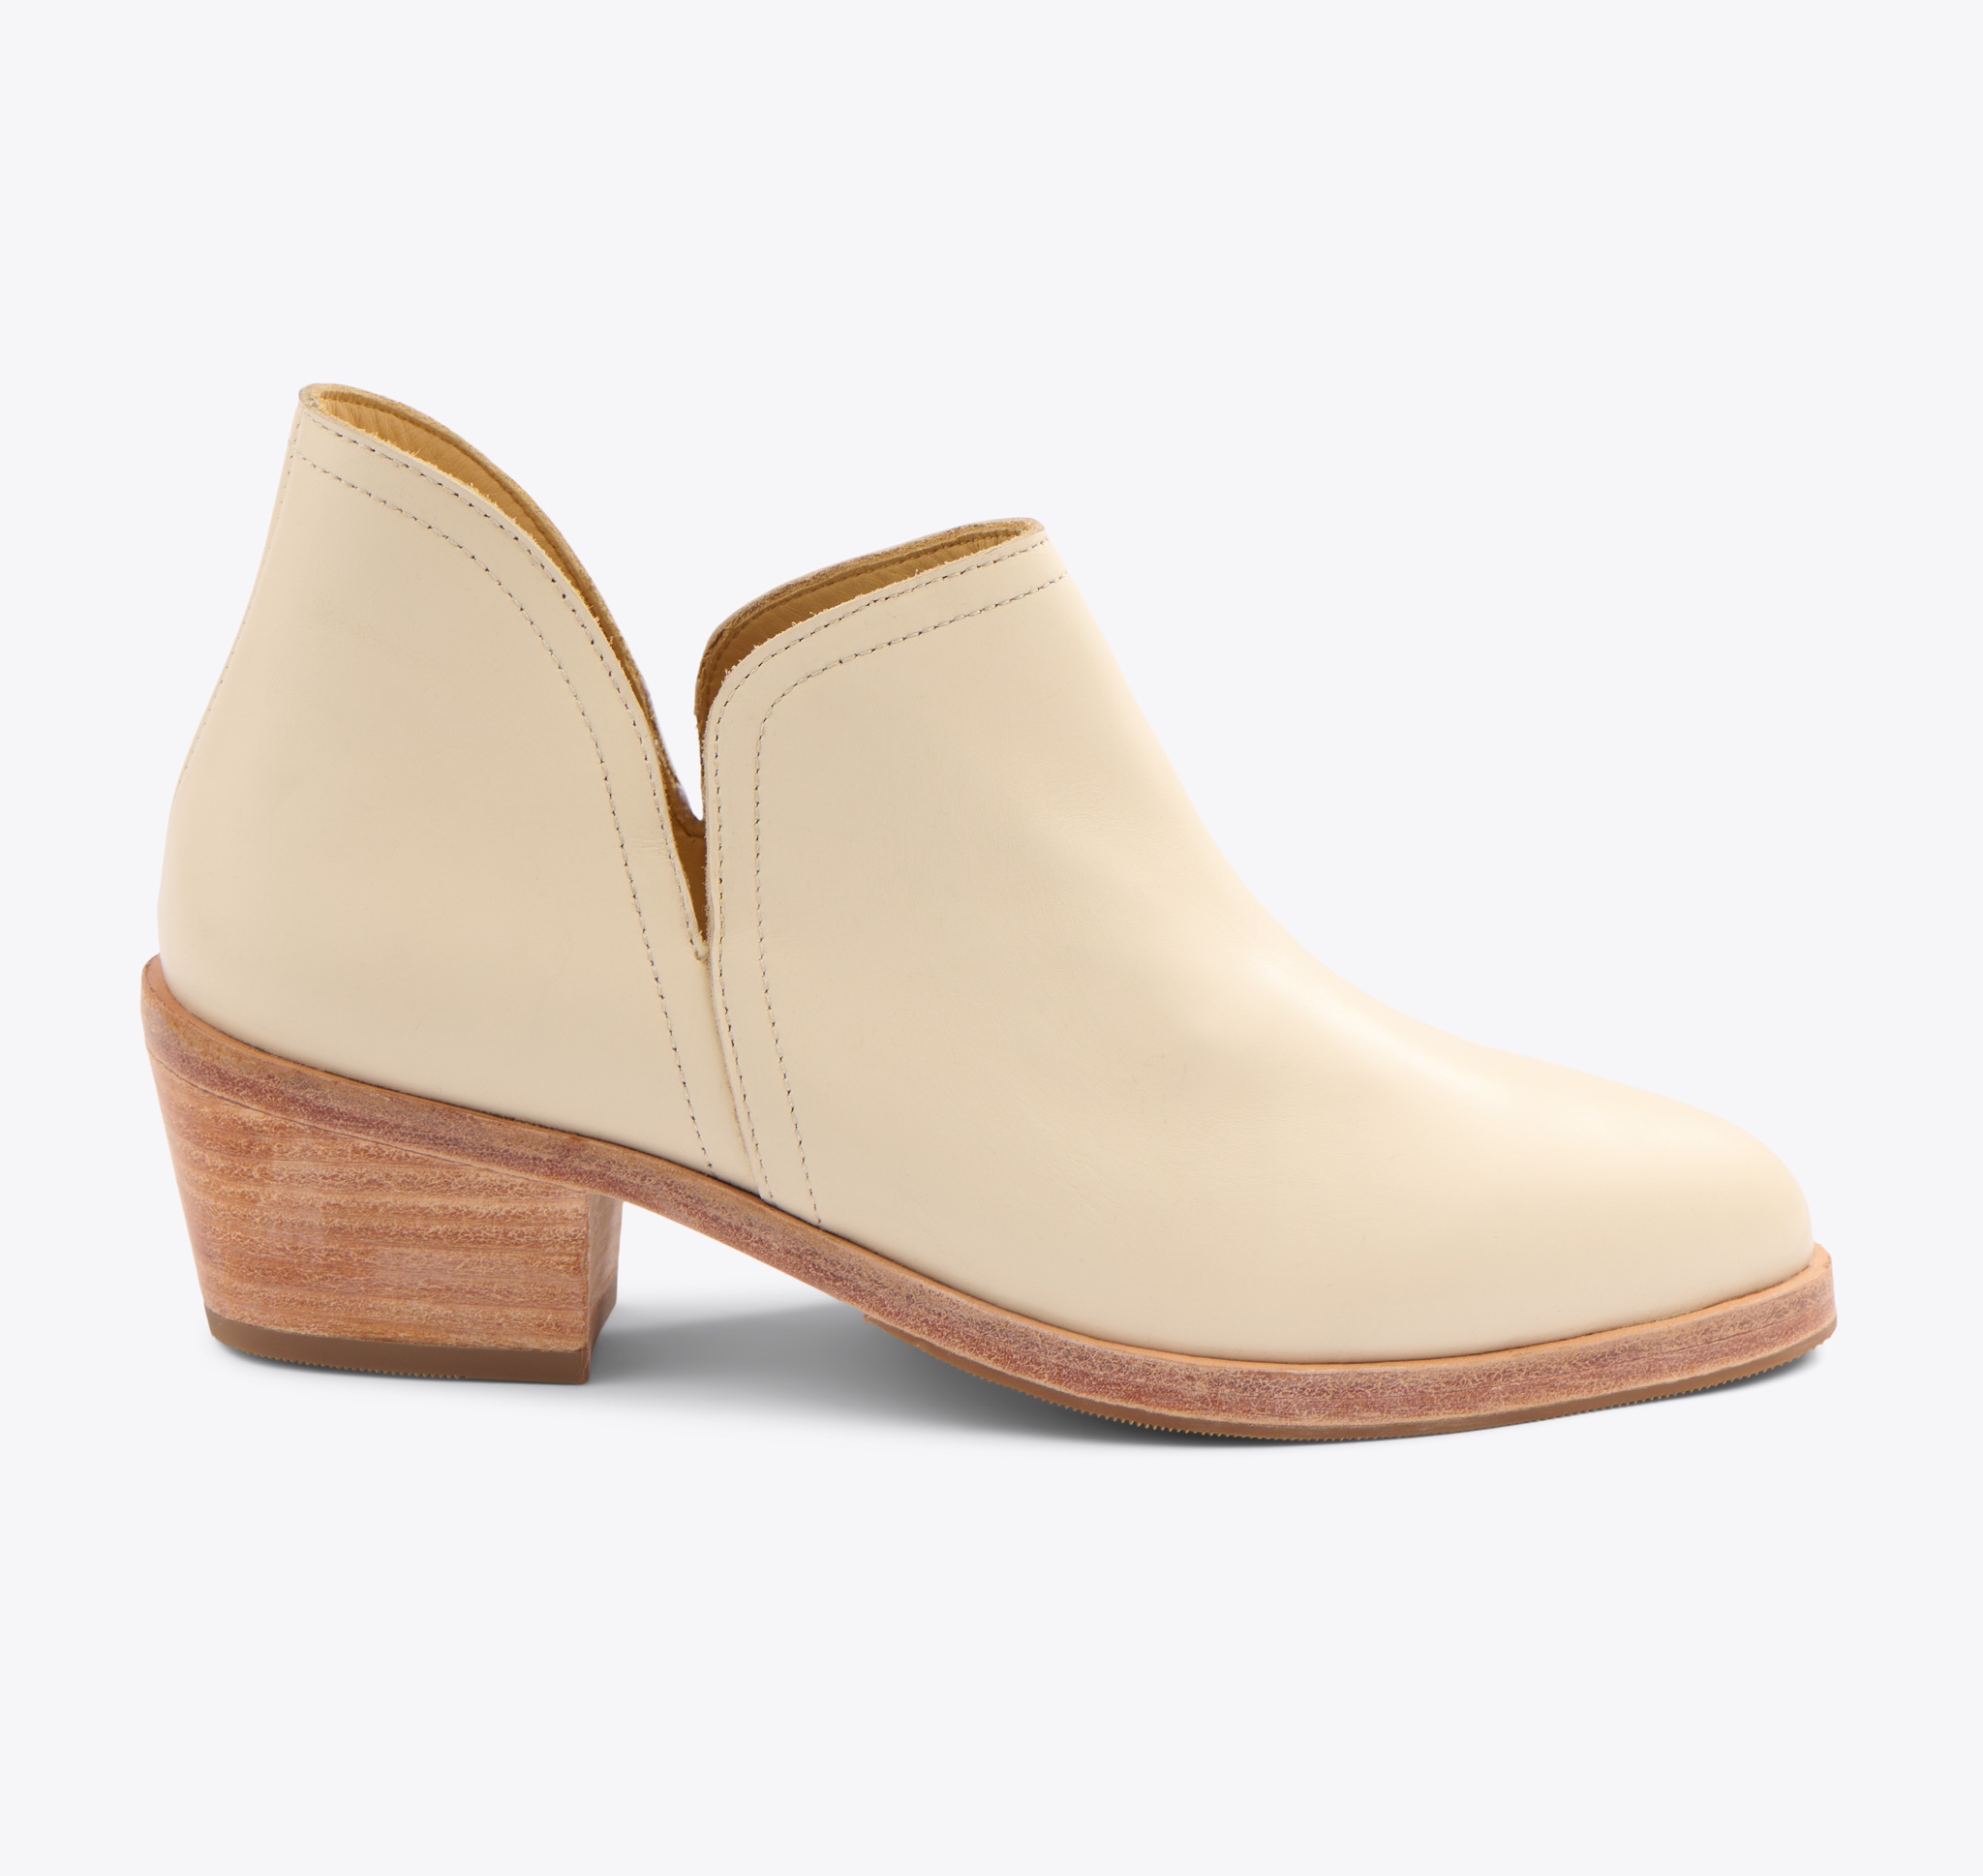 Nisolo Classic Ankle Bootie Bone - Every Nisolo product is built on the foundation of comfort, function, and design. 